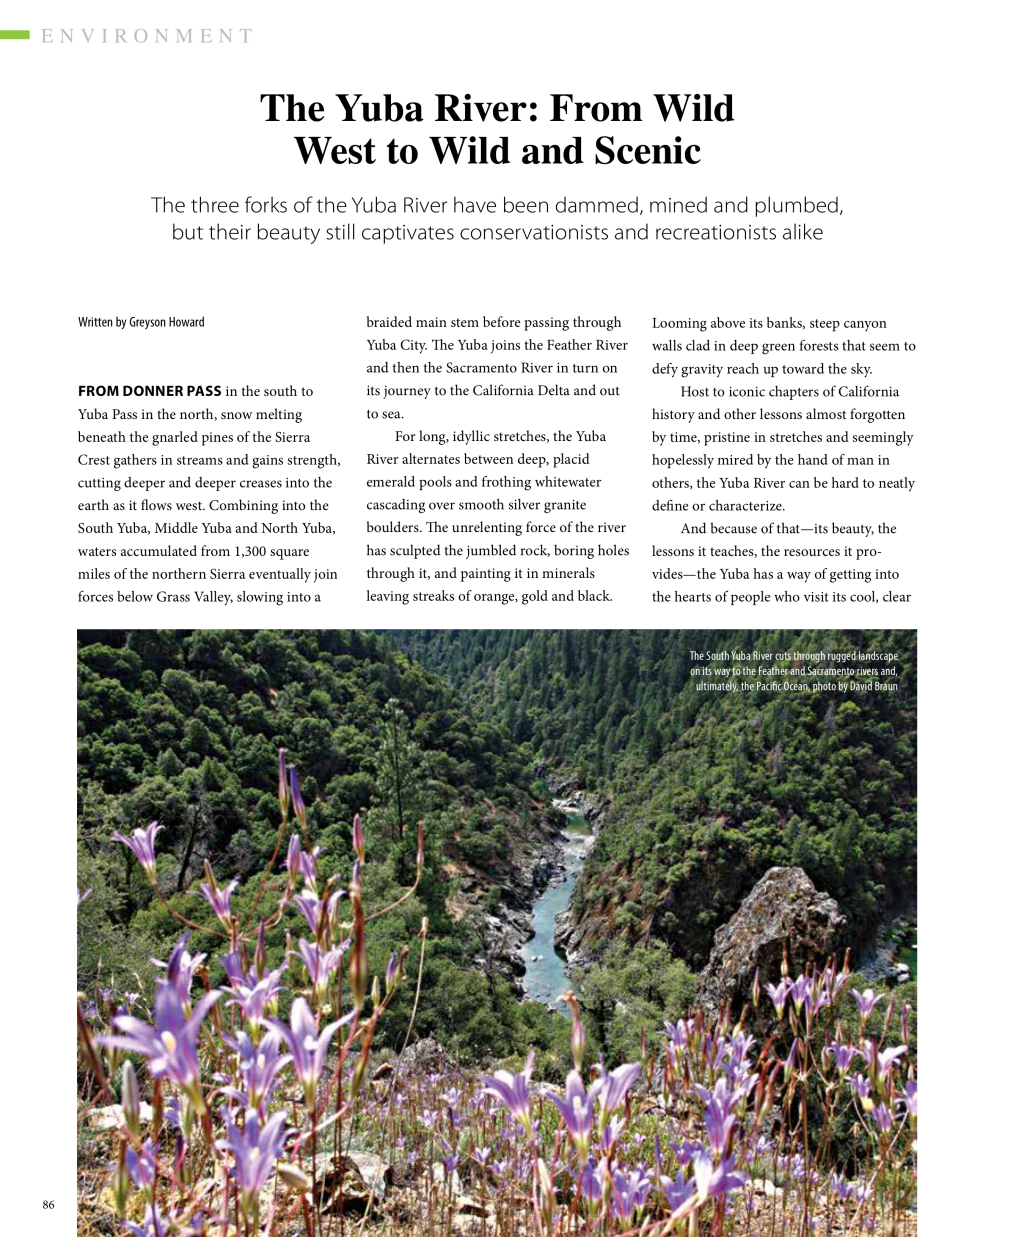 Tahoe Quarterly: “The Yuba River: From Wild West to Wild and Scenic”